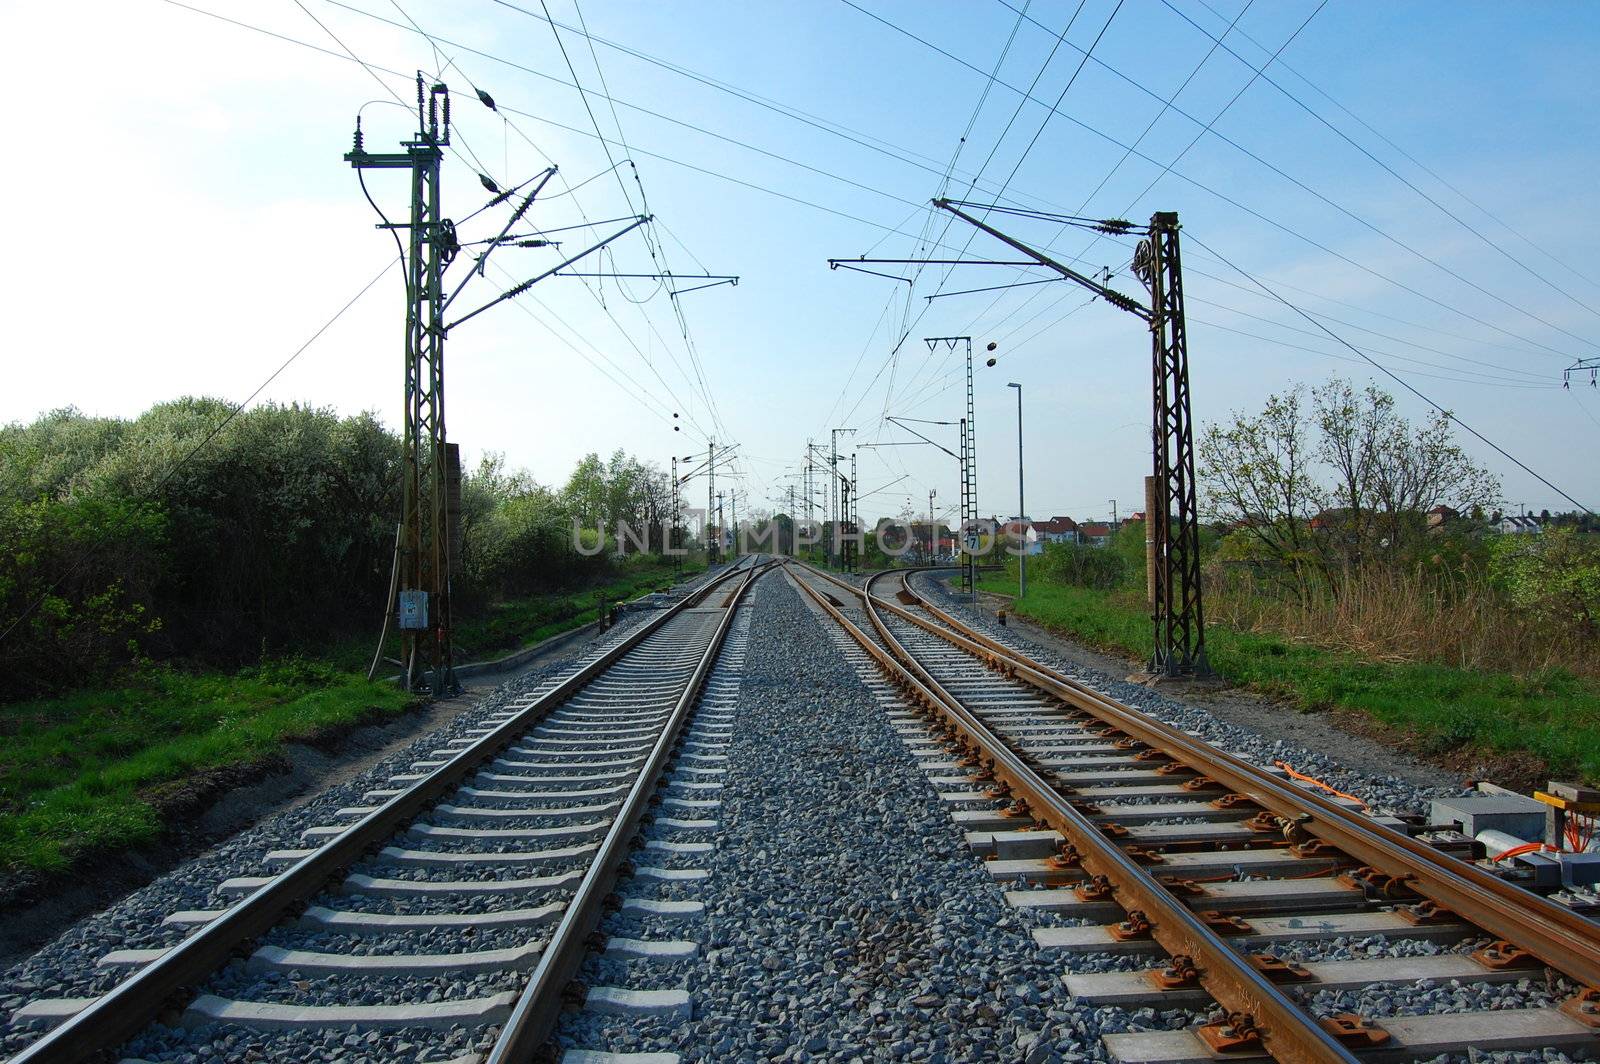 railroad or railway showing concept of industrial transportation